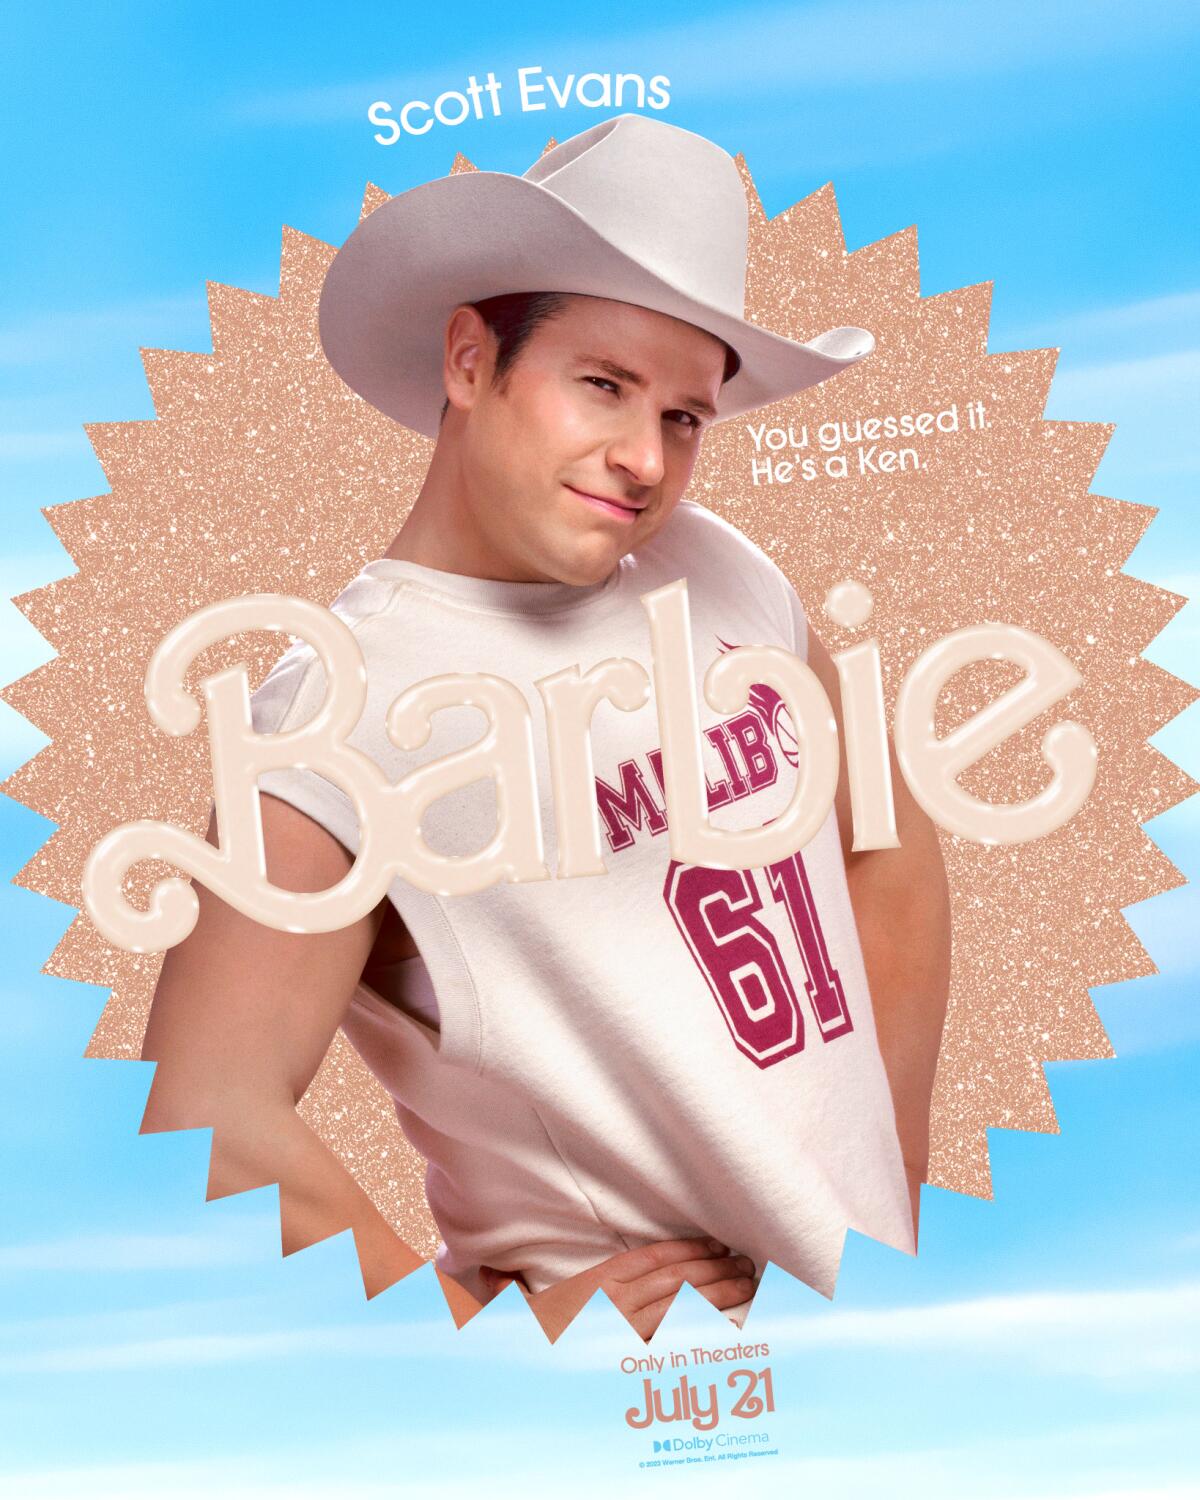 Scott Evans poses with his hands on his hips in a "Barbie" movie poster. He wears a white cowboy hat and an athletic tee.